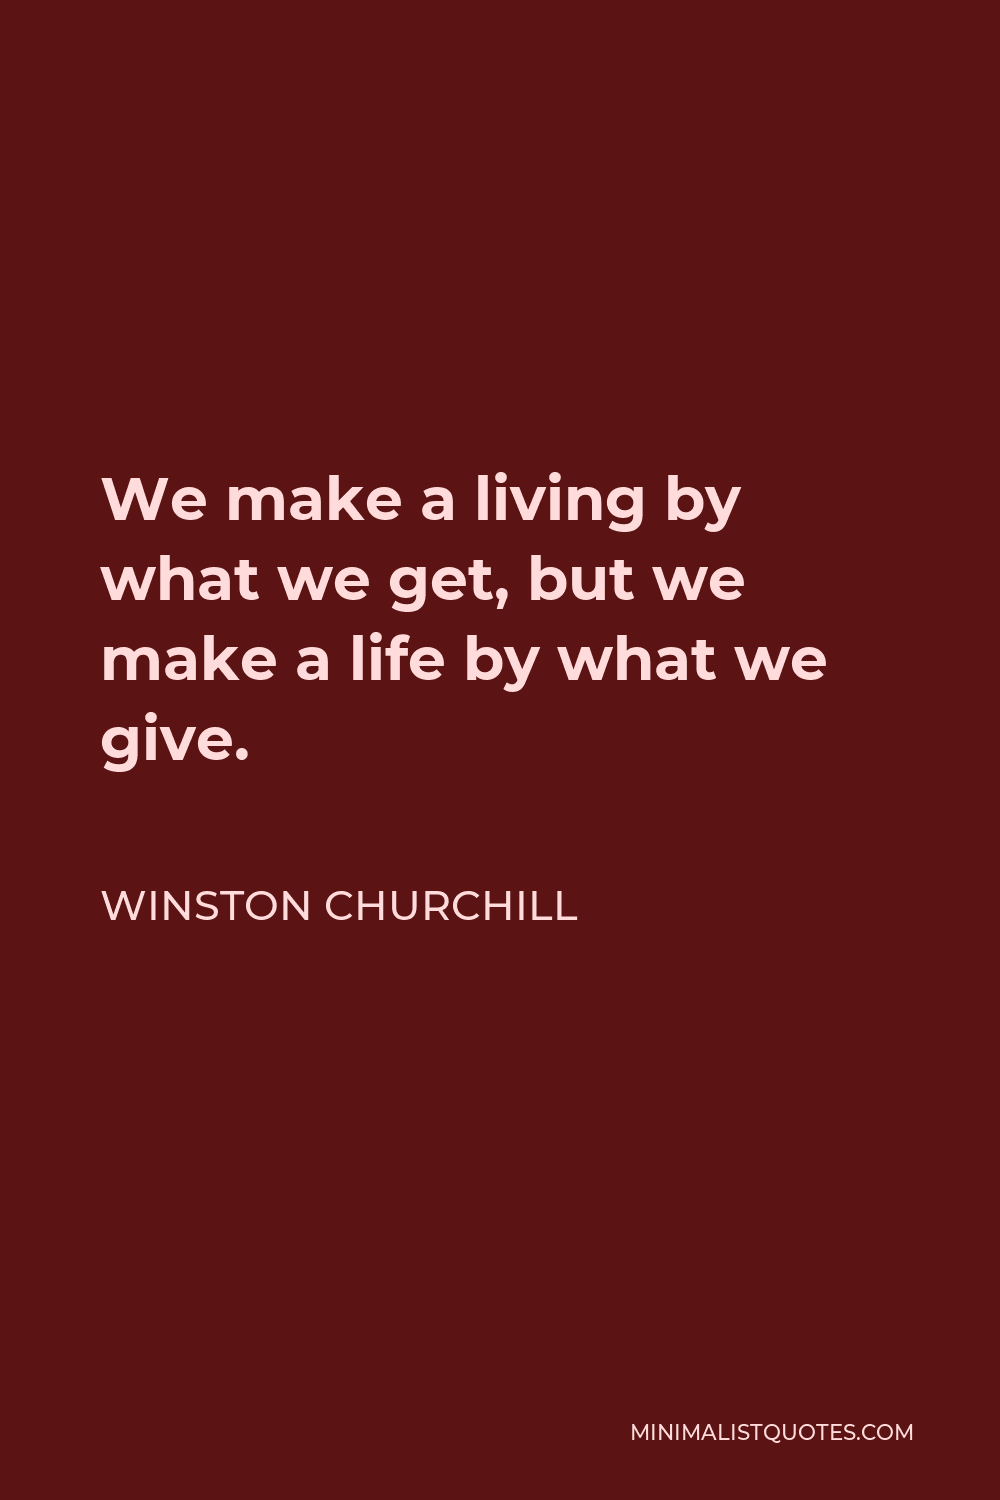 Winston Churchill Quote - We make a living by what we get, but we make a life by what we give.